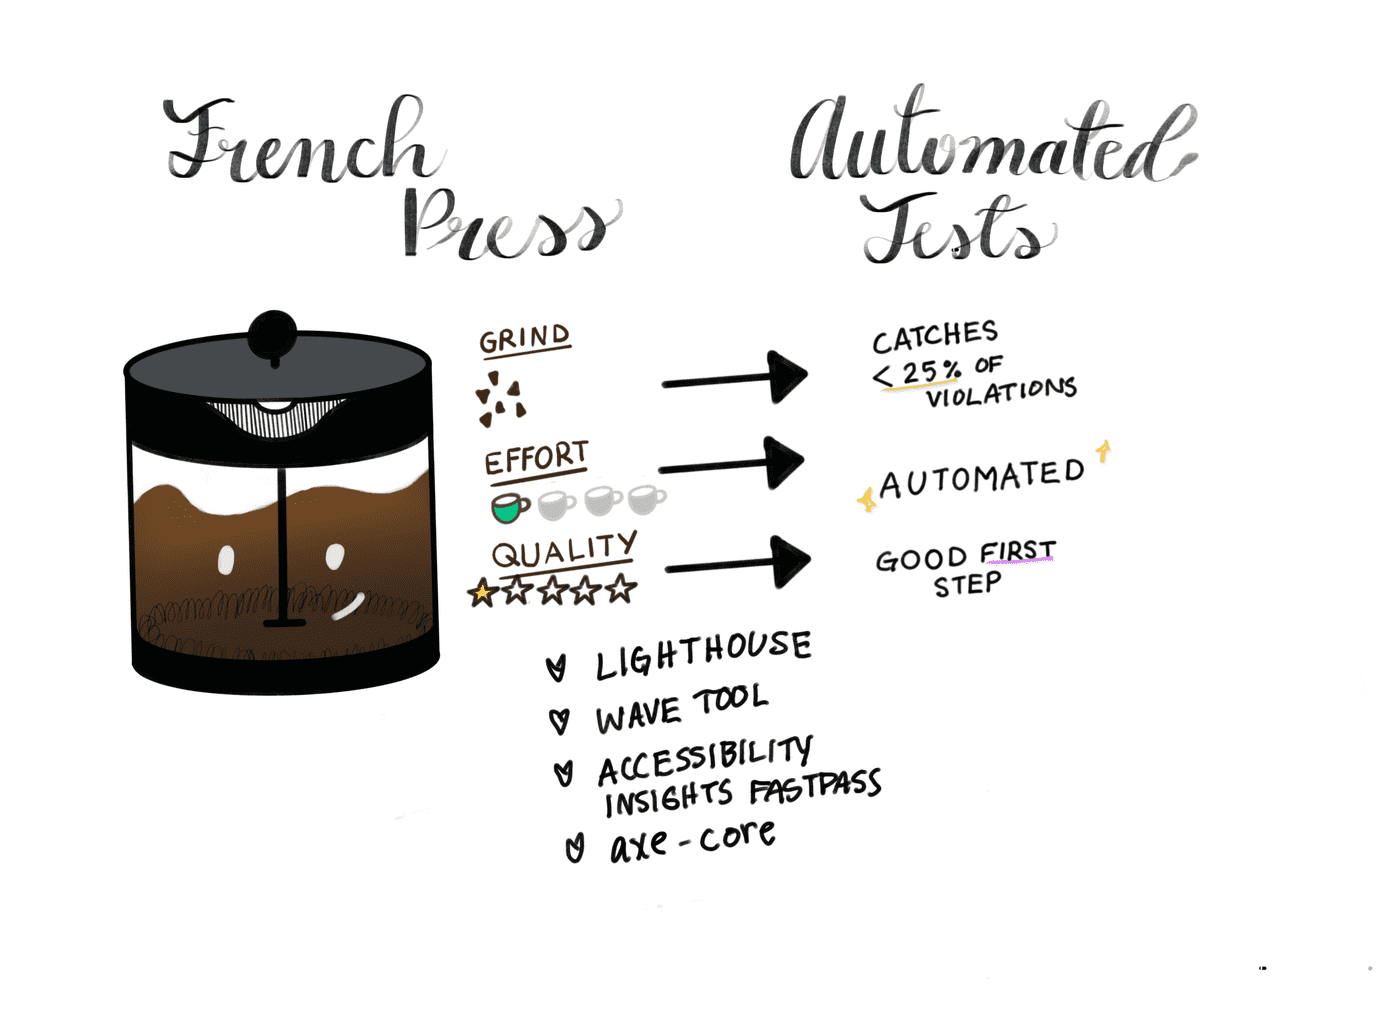 The French Press is Automated Accessibility Testing